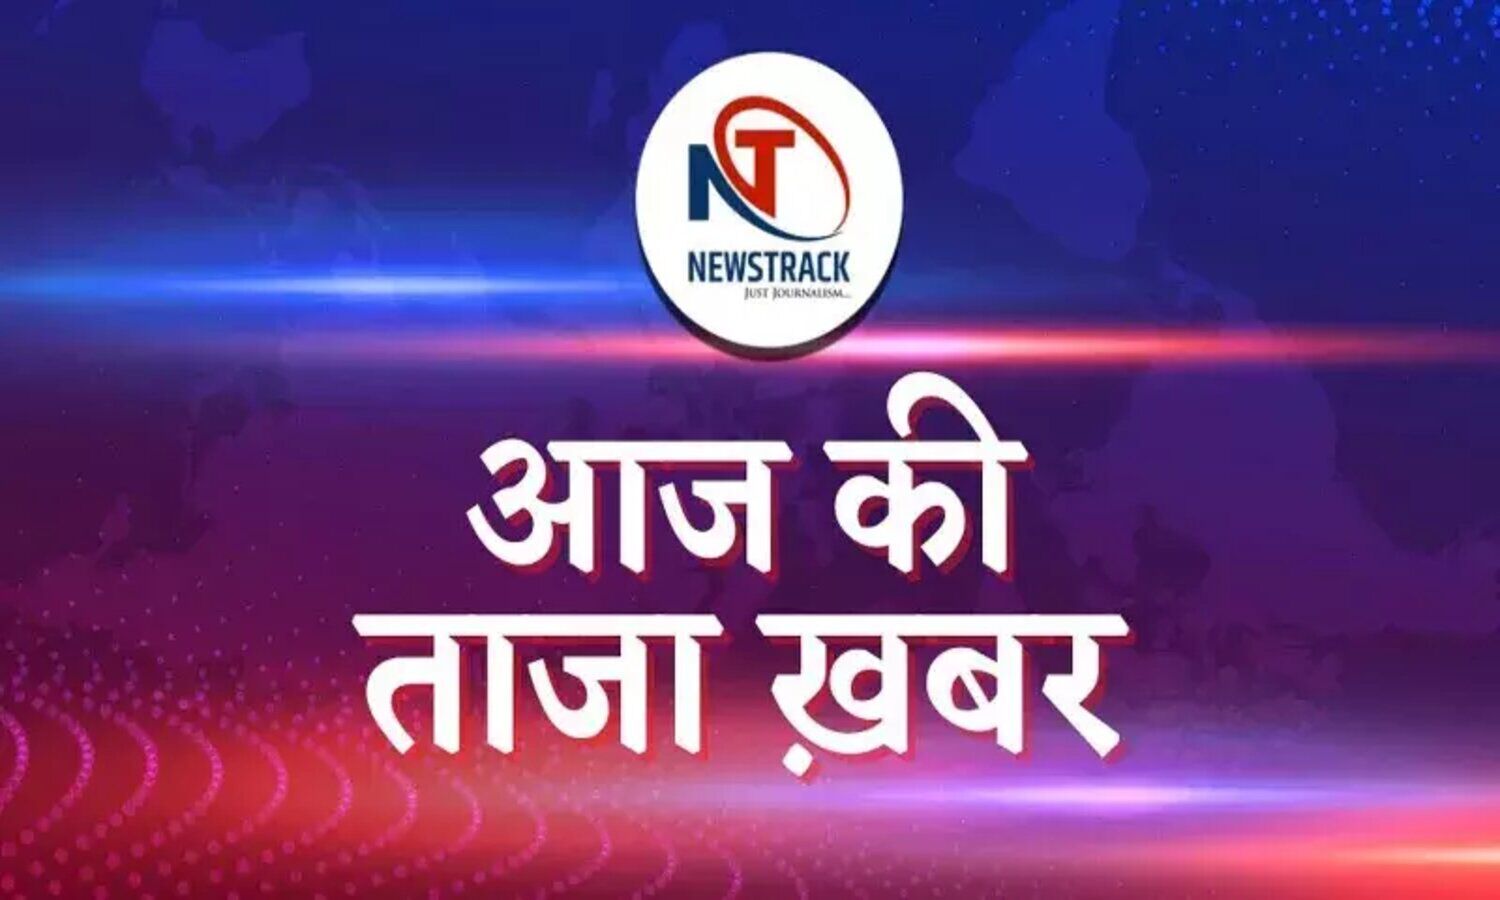 Aaj Ki Taja Khabar: Keep an eye on these major news today, you will get complete details on the newstrack